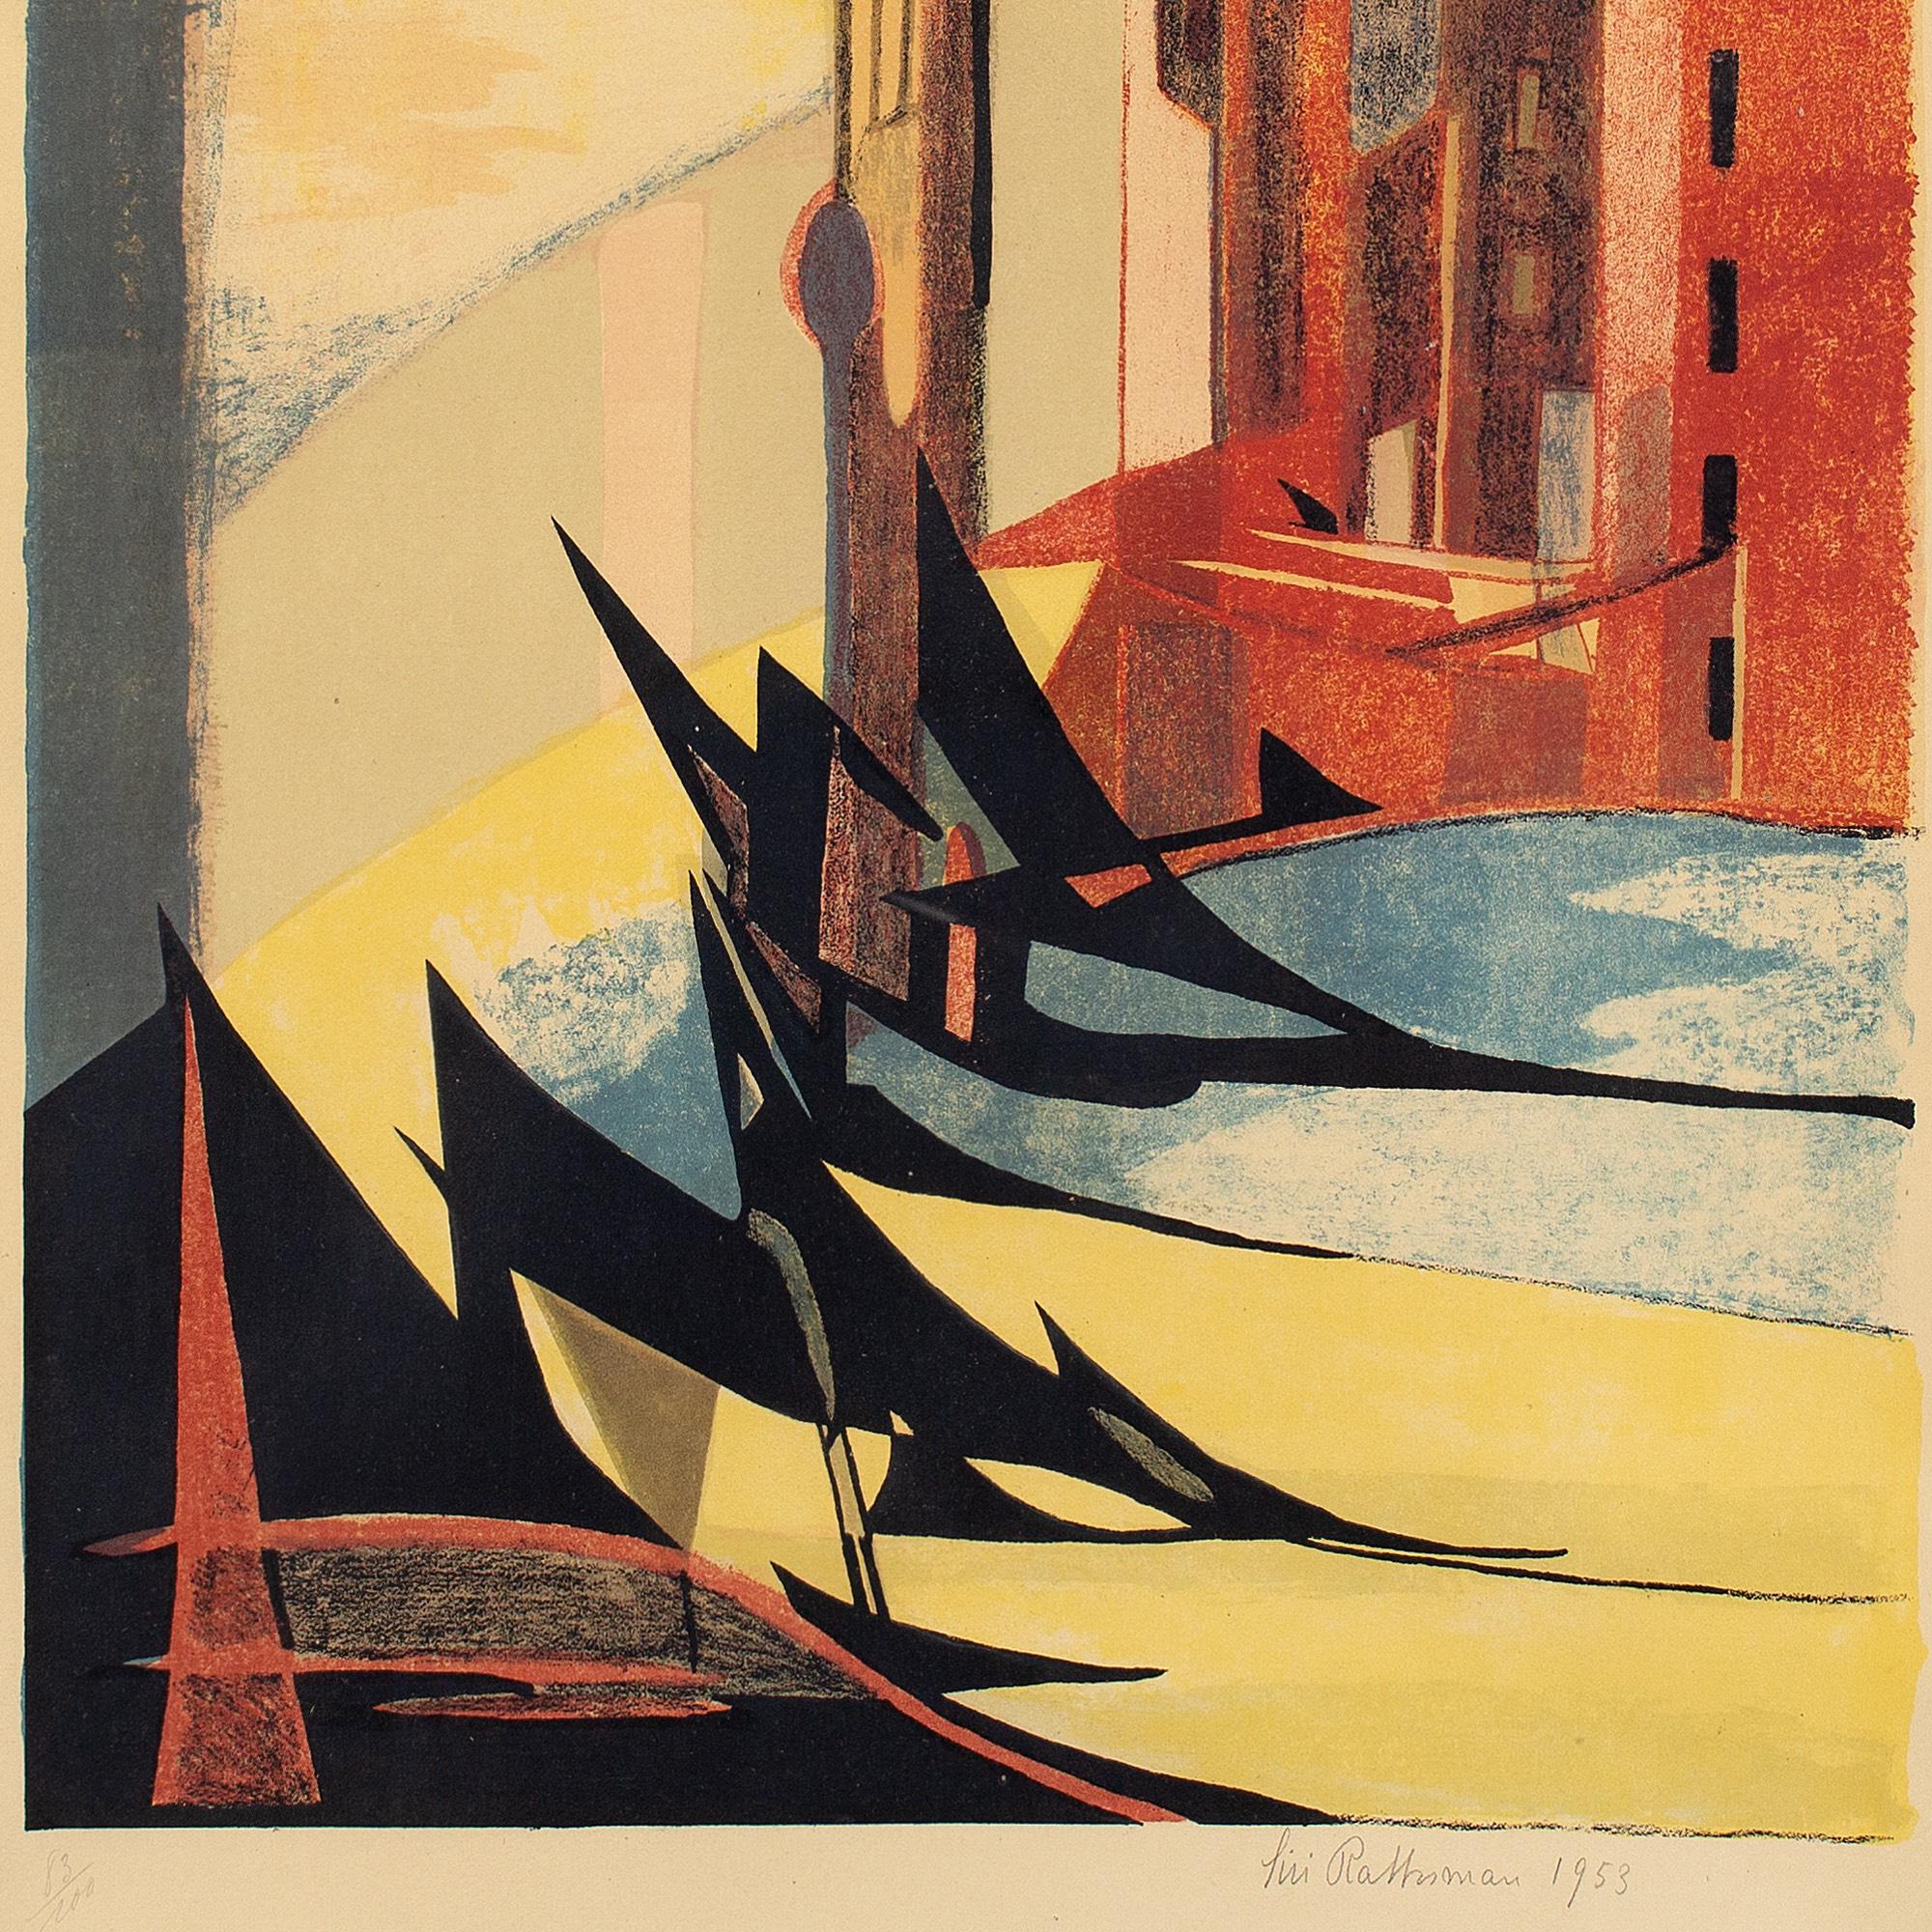 This mid-20th-century modernist composition by Swedish artist Siri Rathsman (1895-1974) depicts a coastal scene with buildings. It’s an exciting piece, produced by an artist working in Paris at the heart of the avant-garde.

Rathman was an